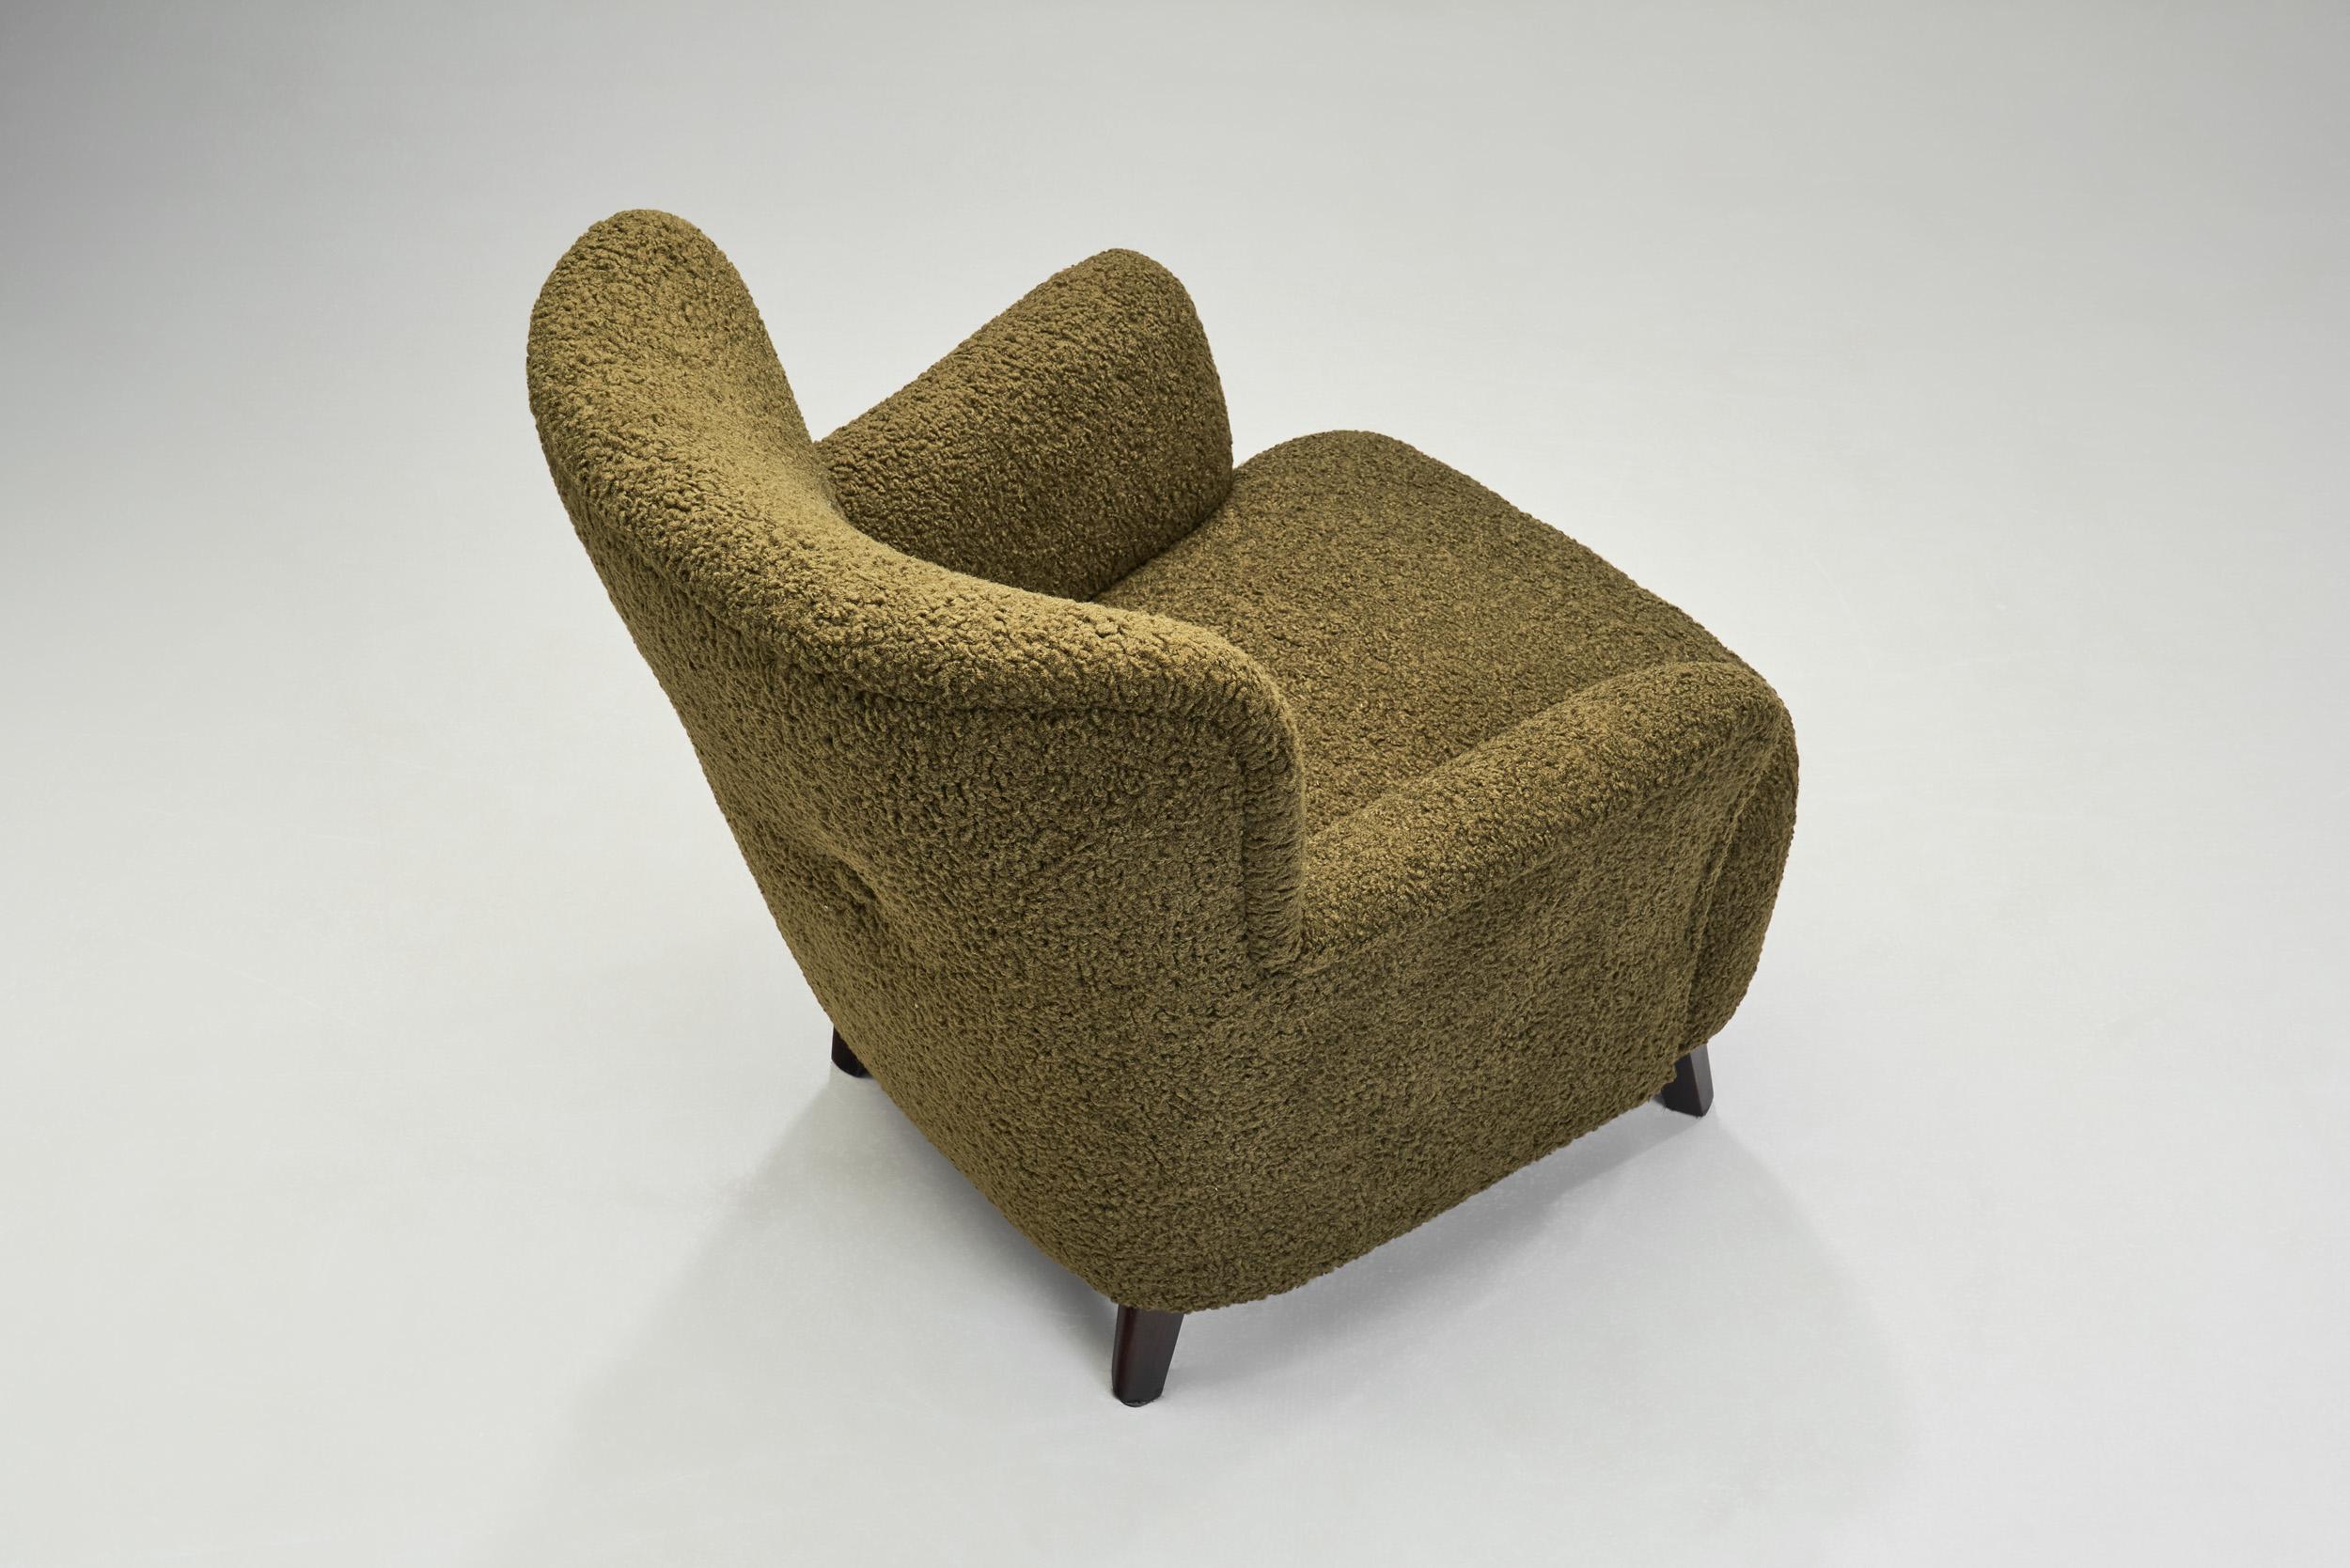 Fabric Mid-Century Upholstered Olive Green Armchair, Europe Mid 20th Century For Sale